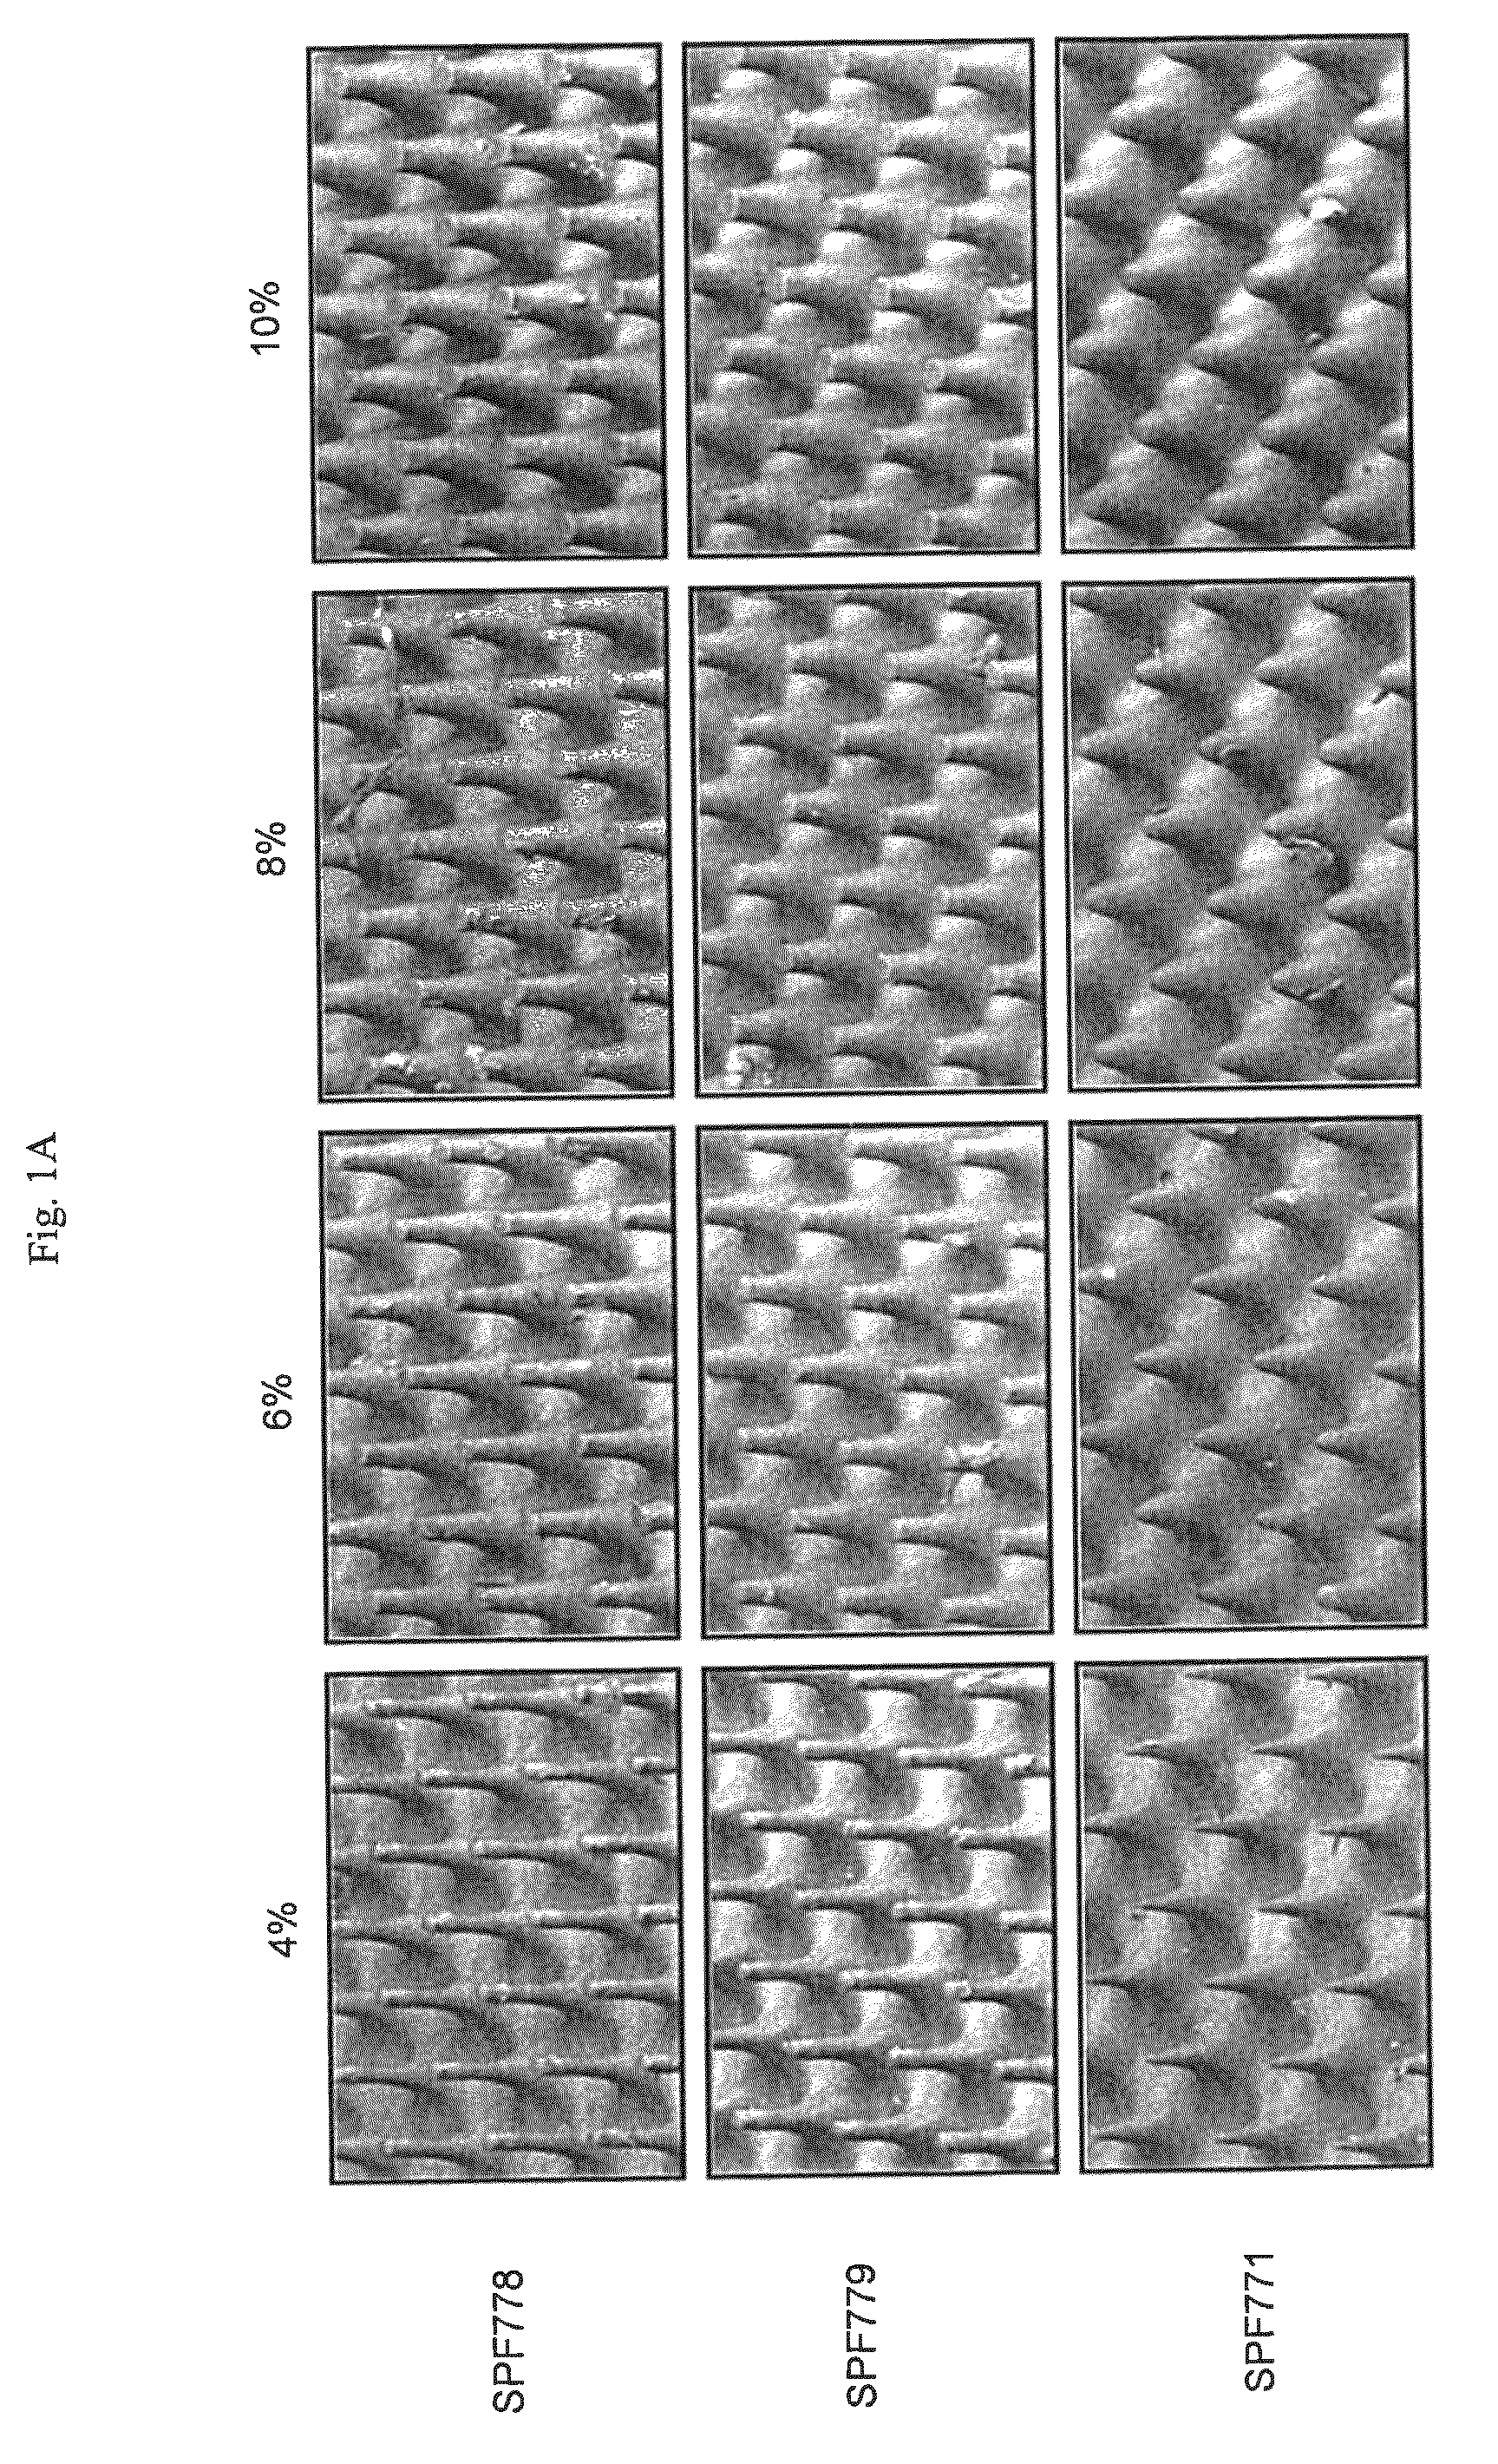 Method of improving surface cure in digital flexographic printing plates